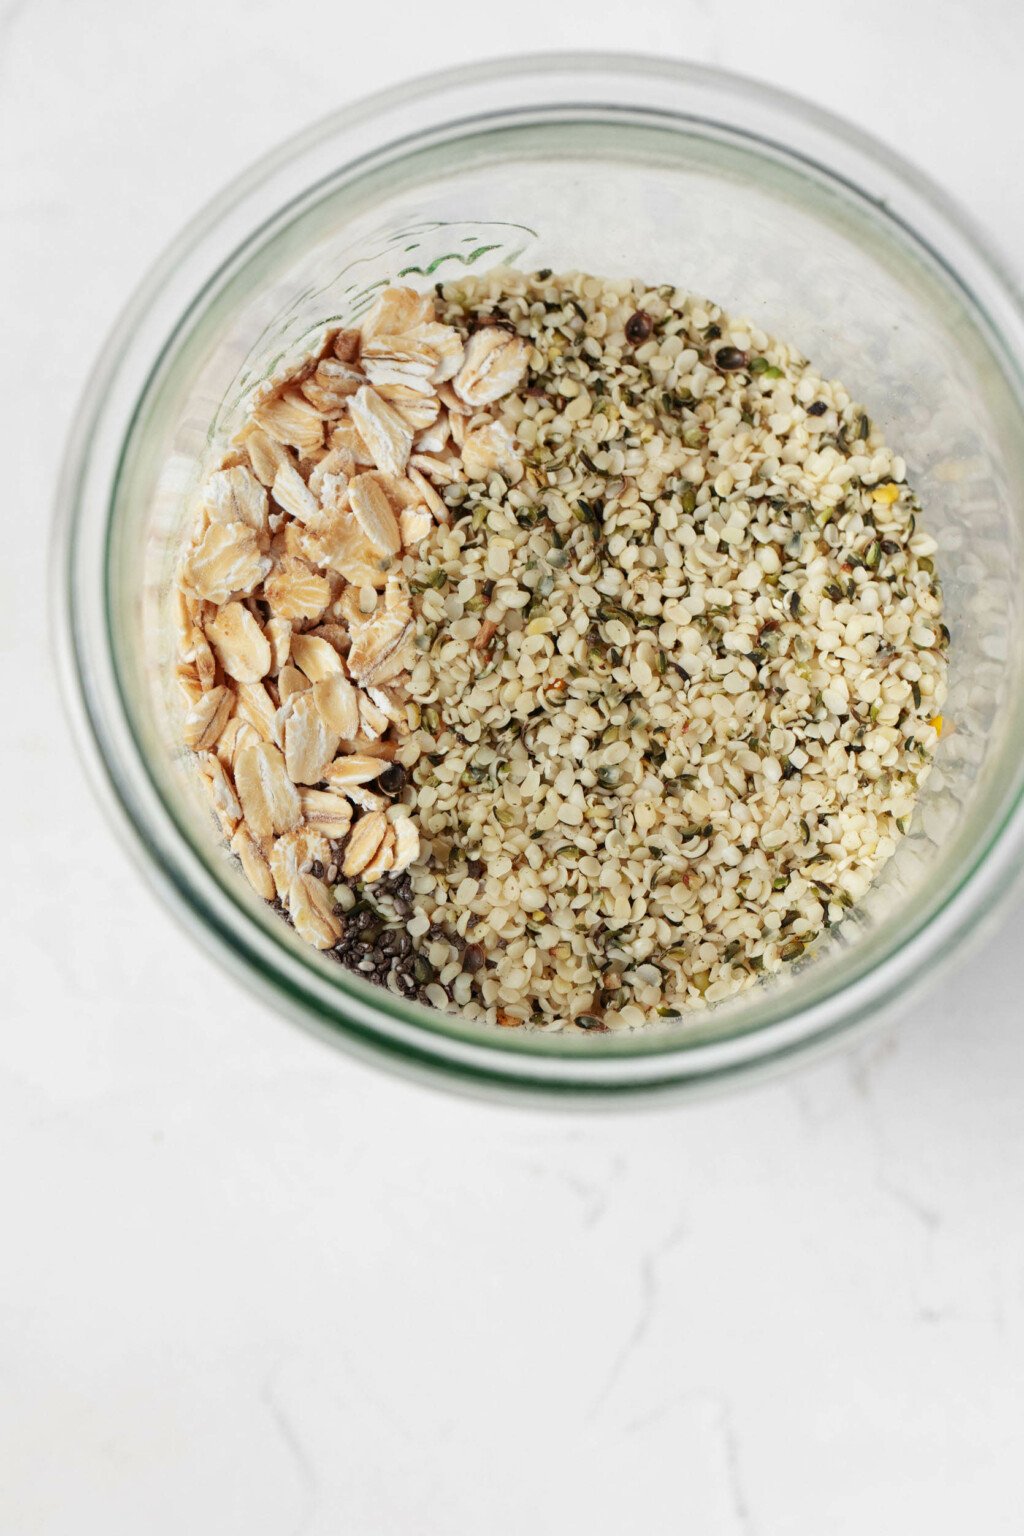 Chia seeds, rolled oats, and hemp seeds are visible in a glass mason jar, which rests on a white surface.